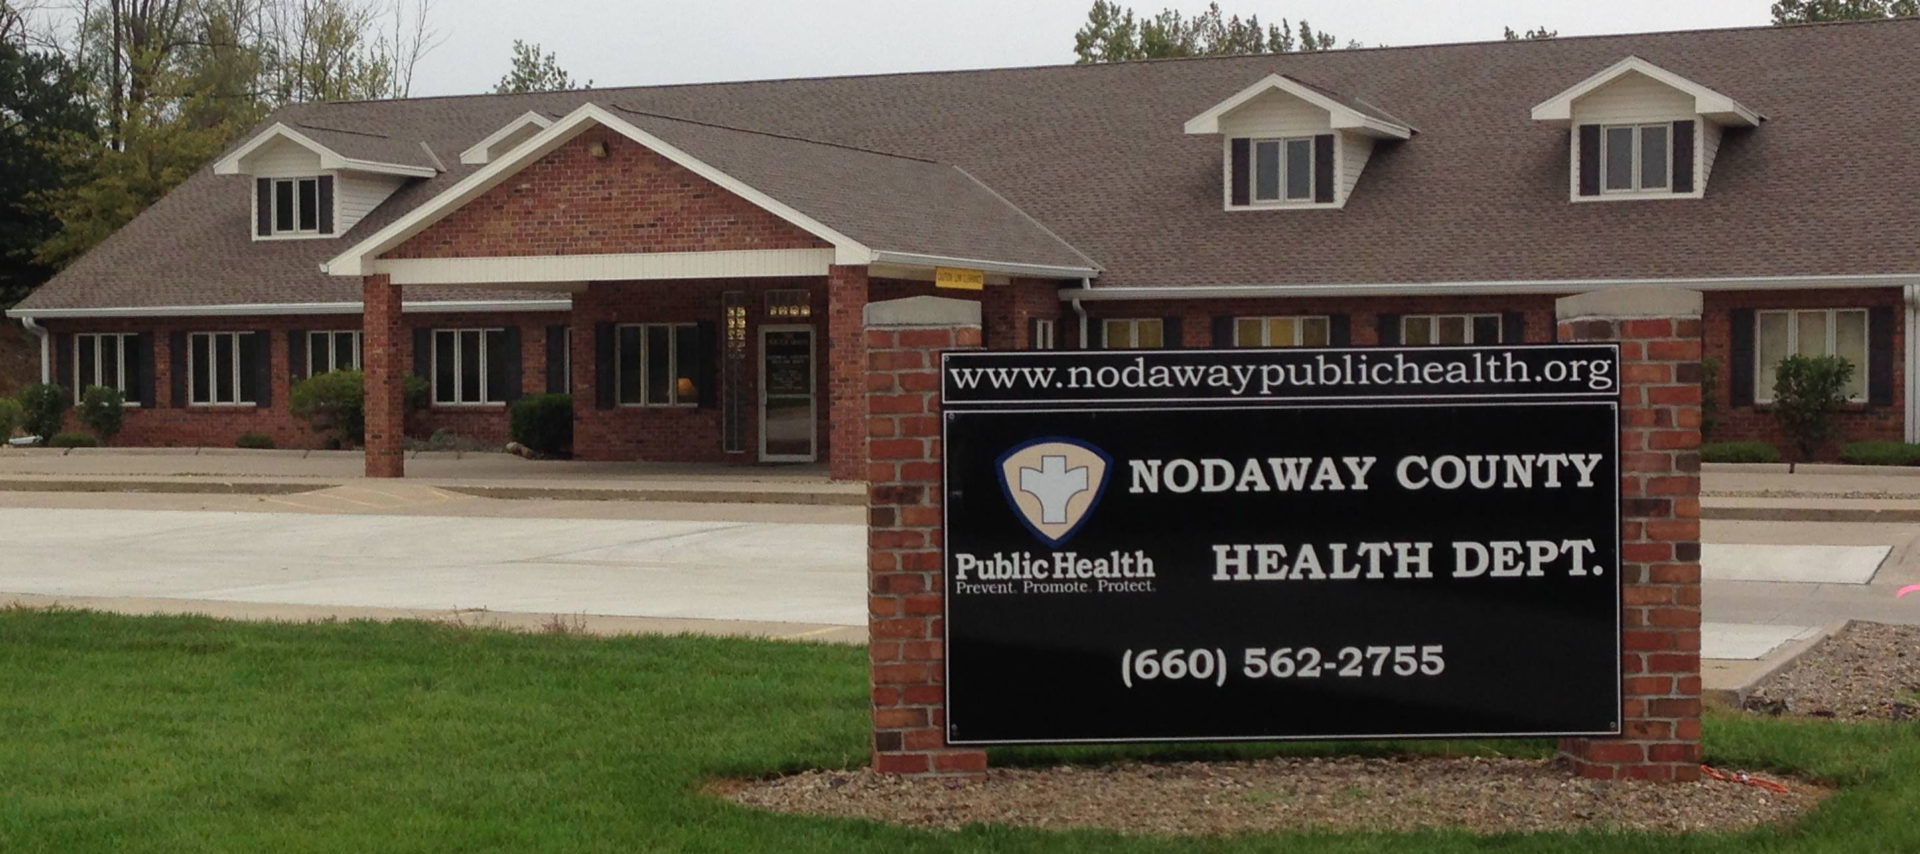 Fourth Nodaway County Resident Tests Positive For Covid-19 - Nodaway News